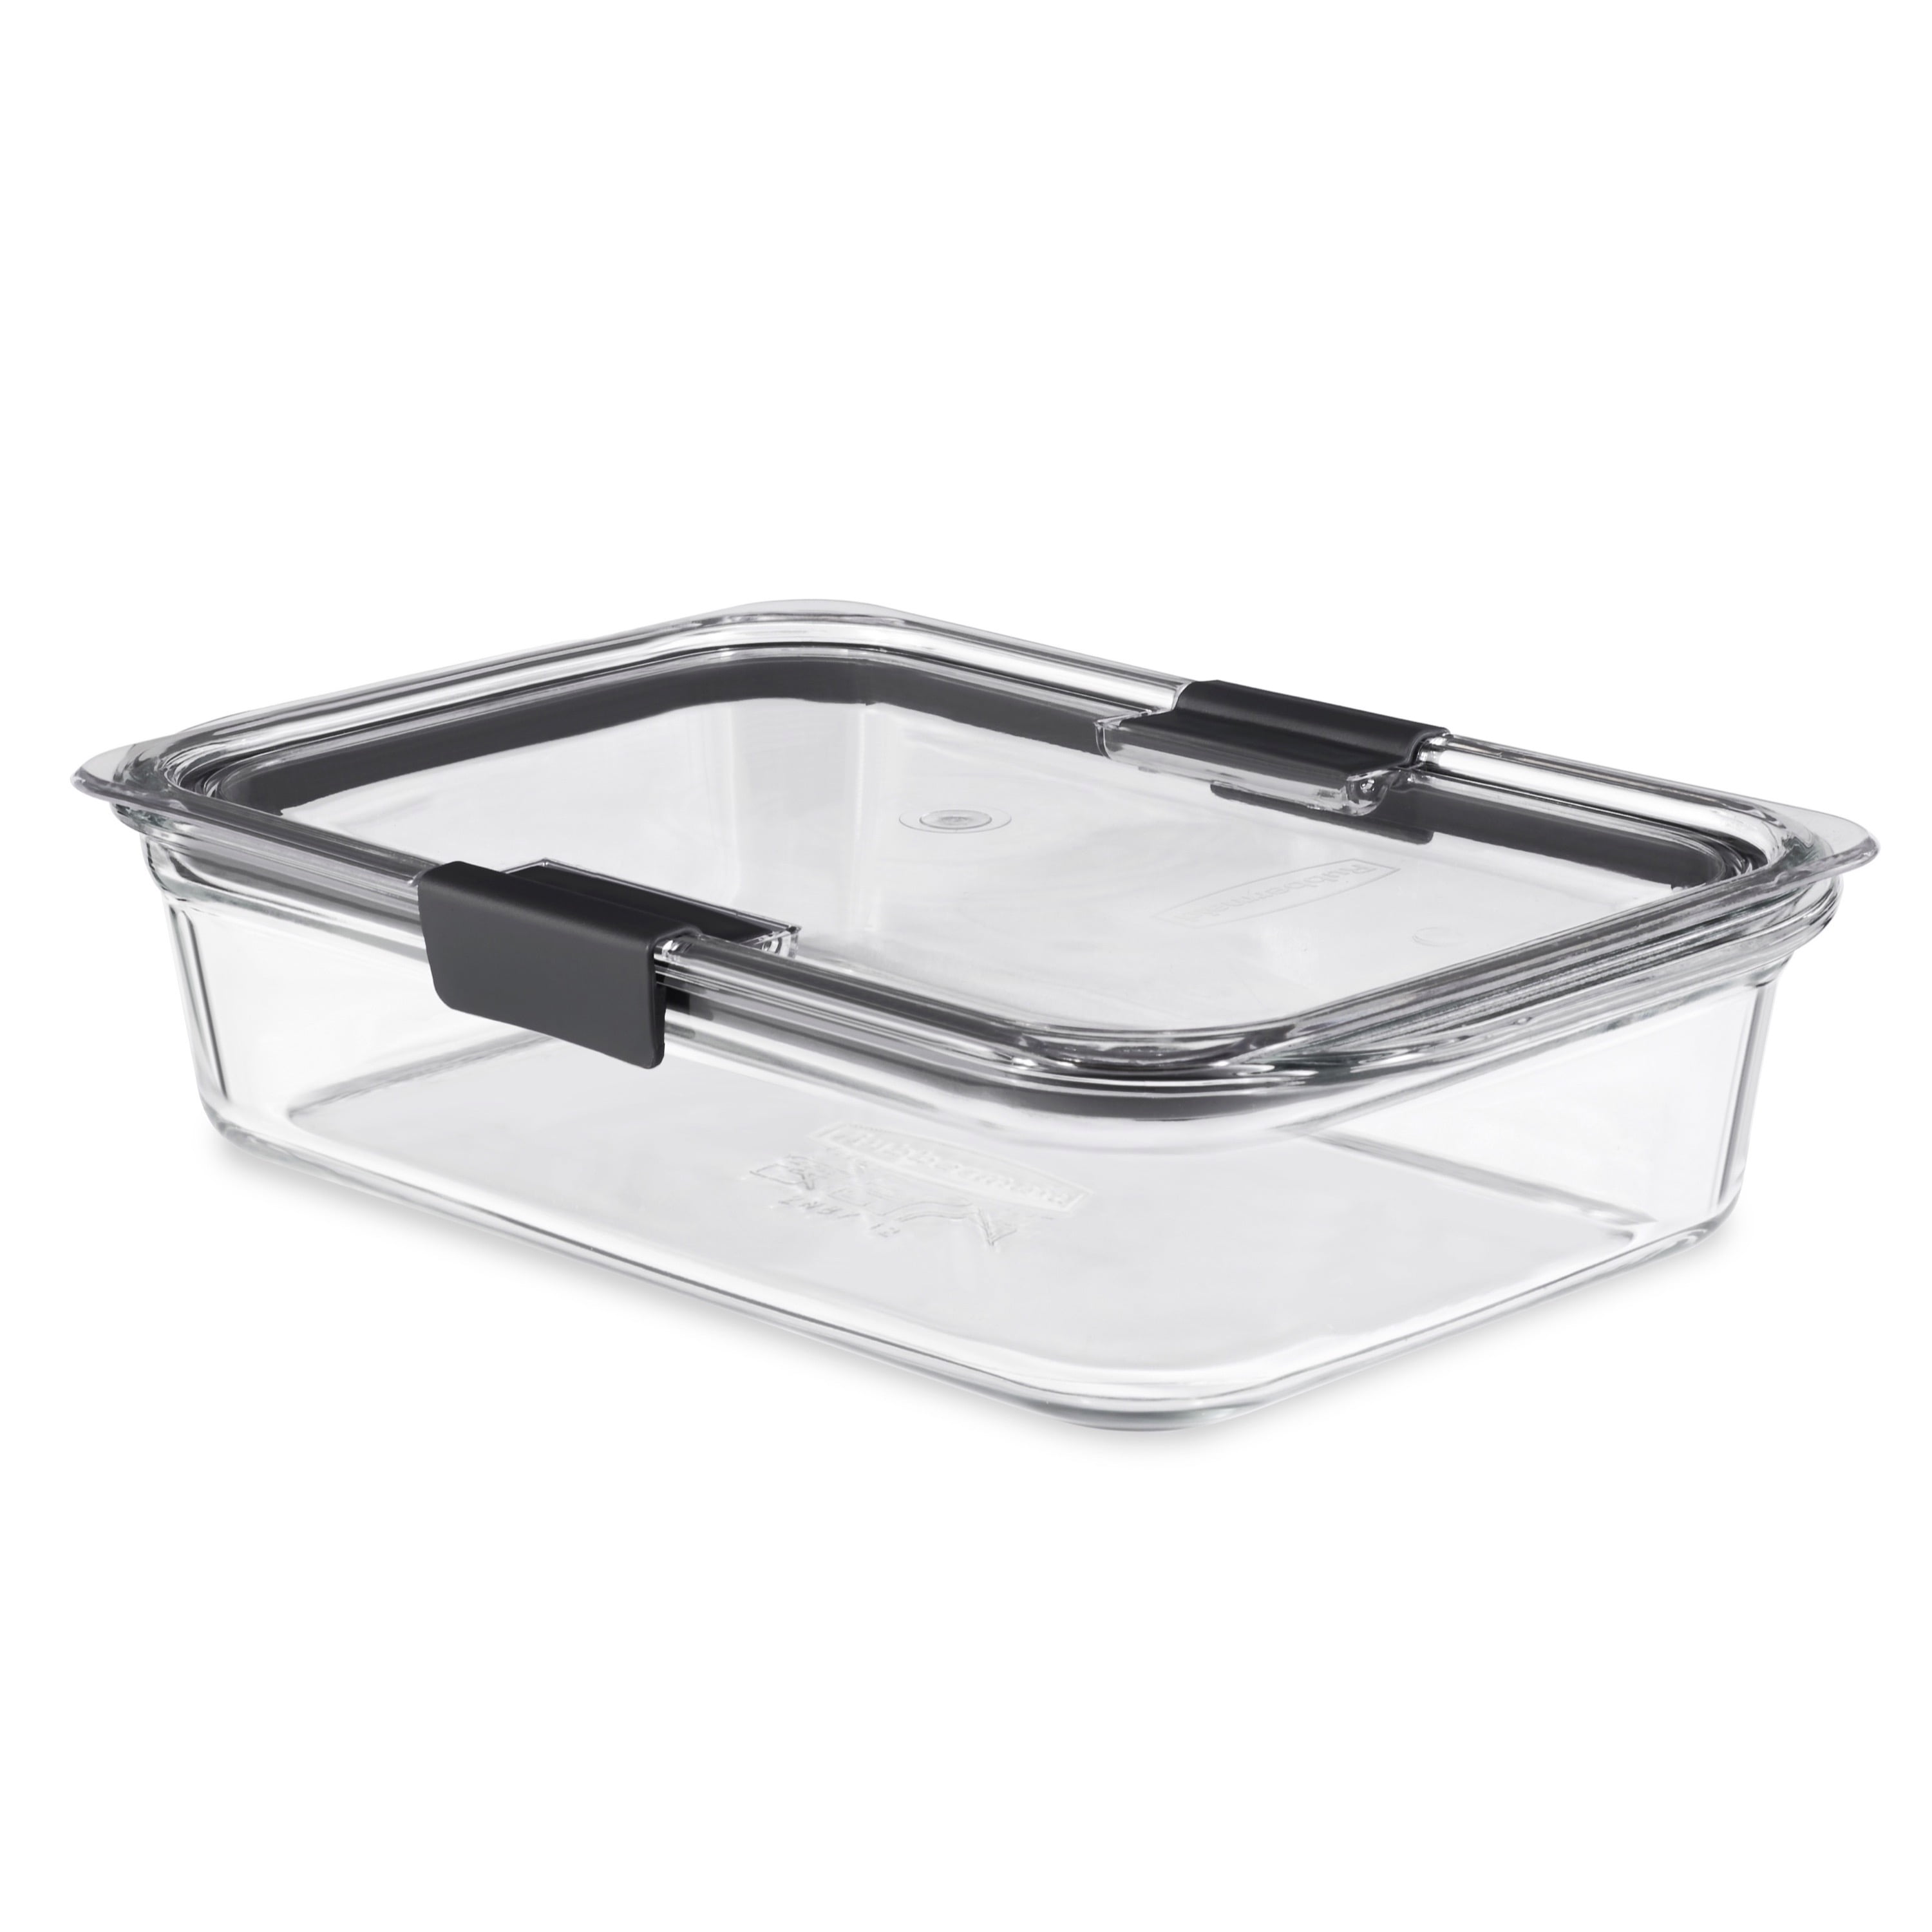 Rubbermaid® Brilliance Leakproof Container - Clear, 9.6 cup - Kroger